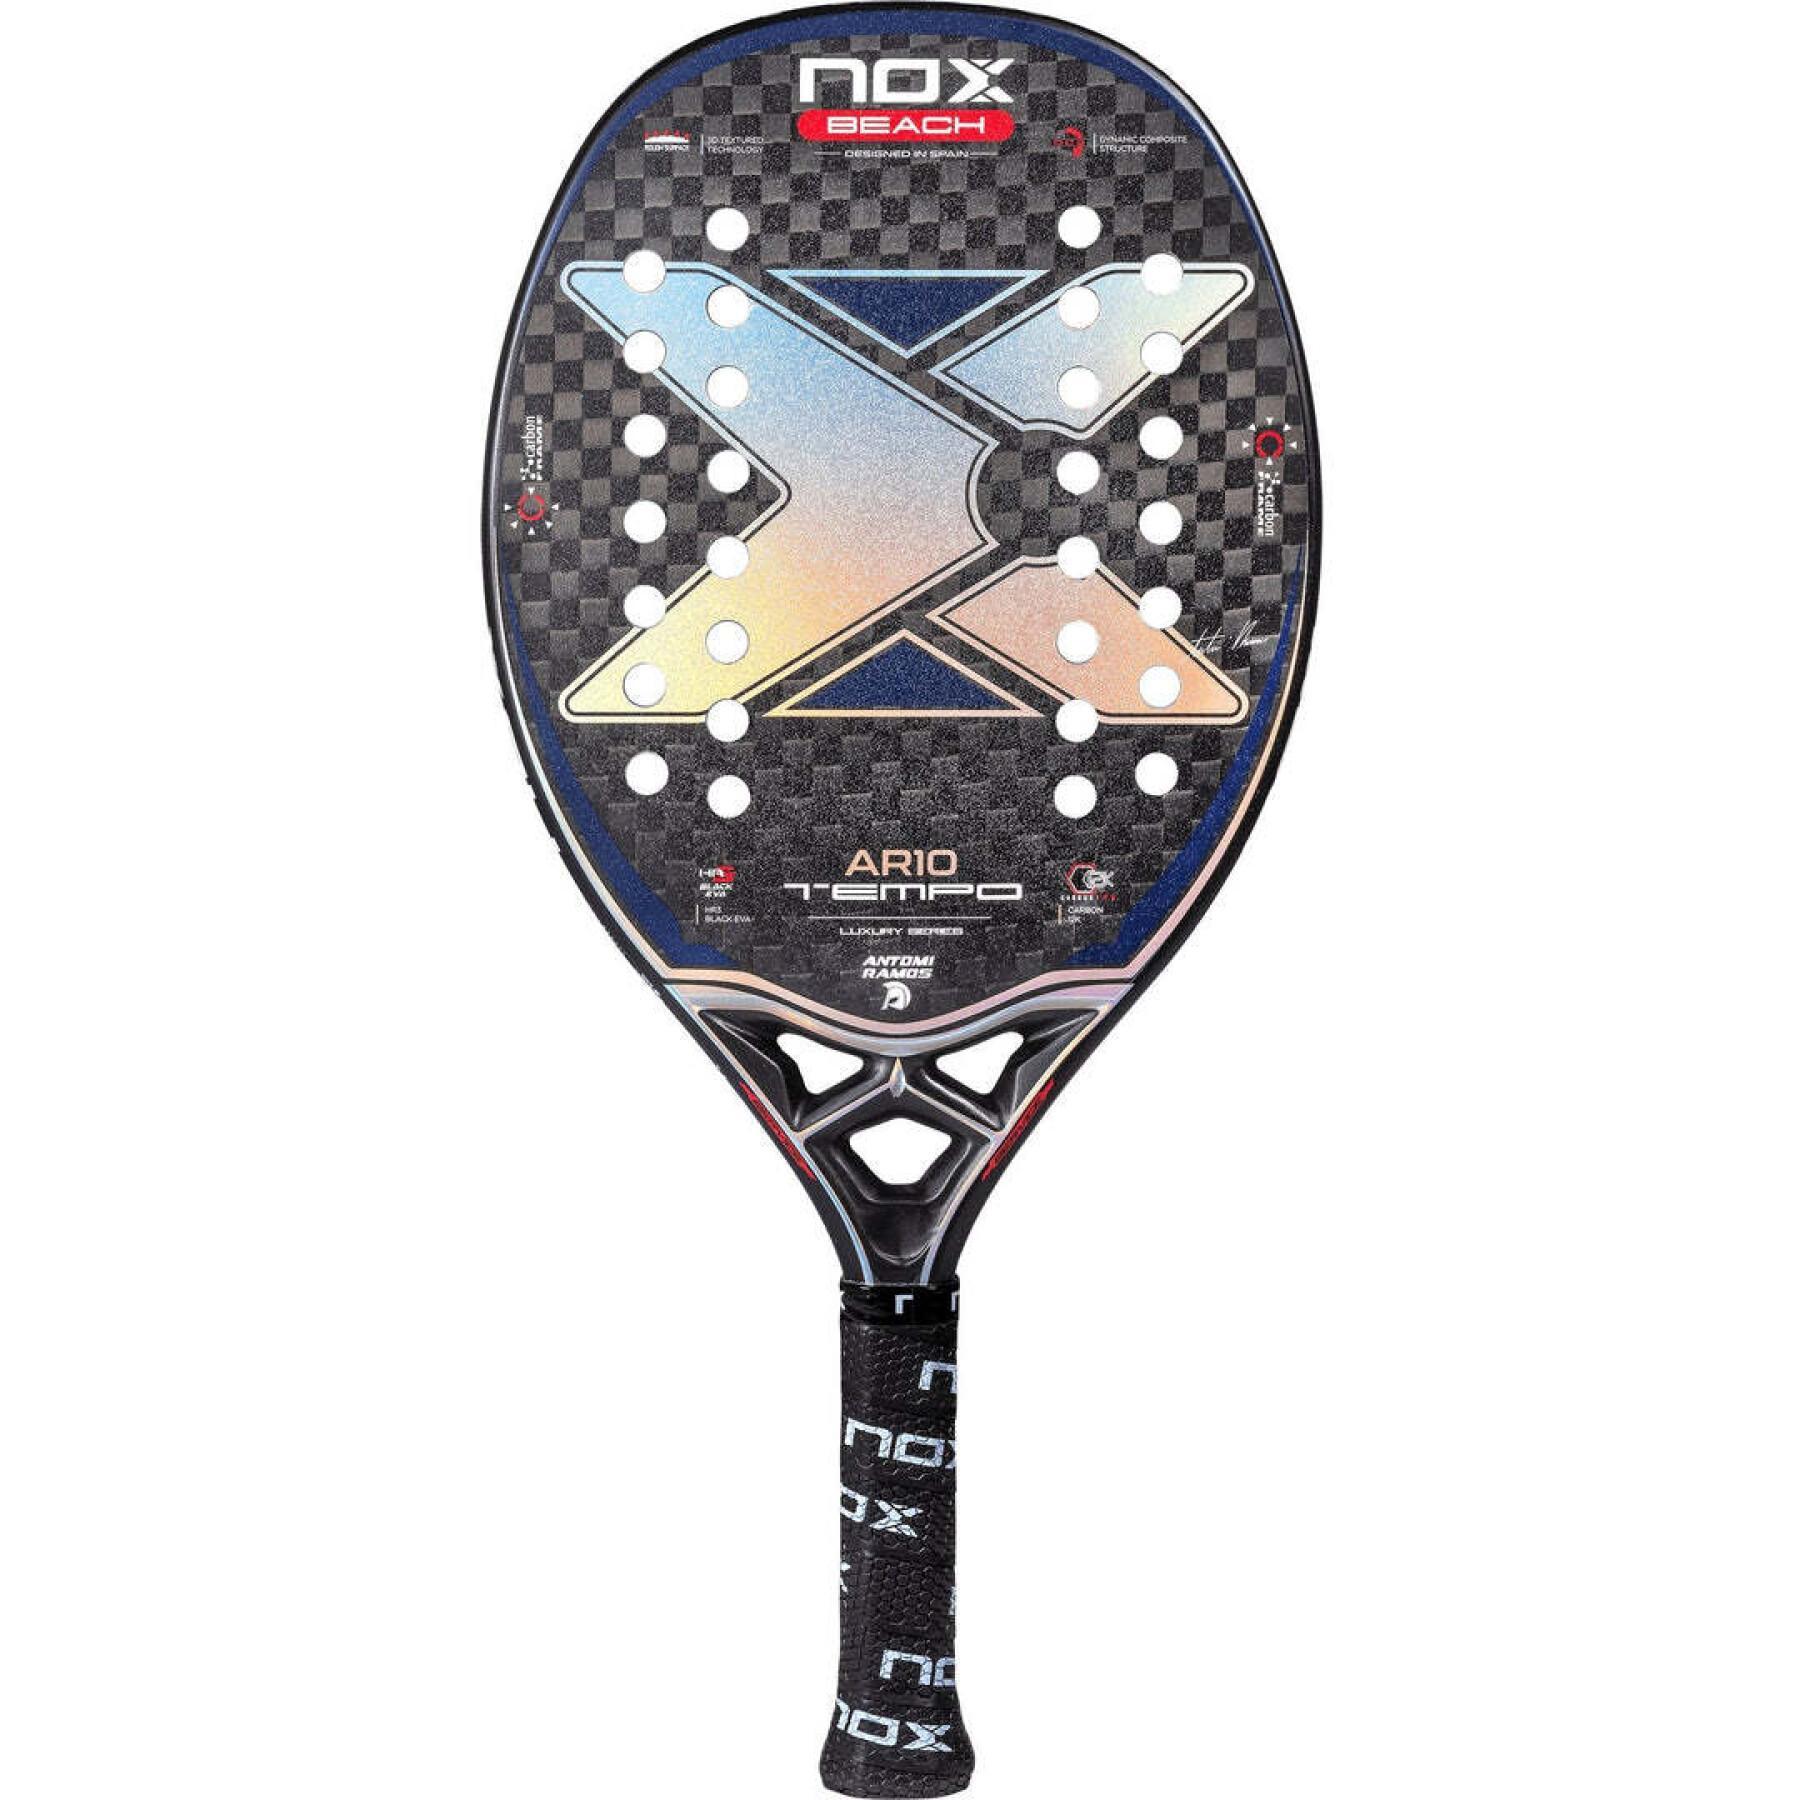 Racket from padel Nox Tempo By Antomi Ramos